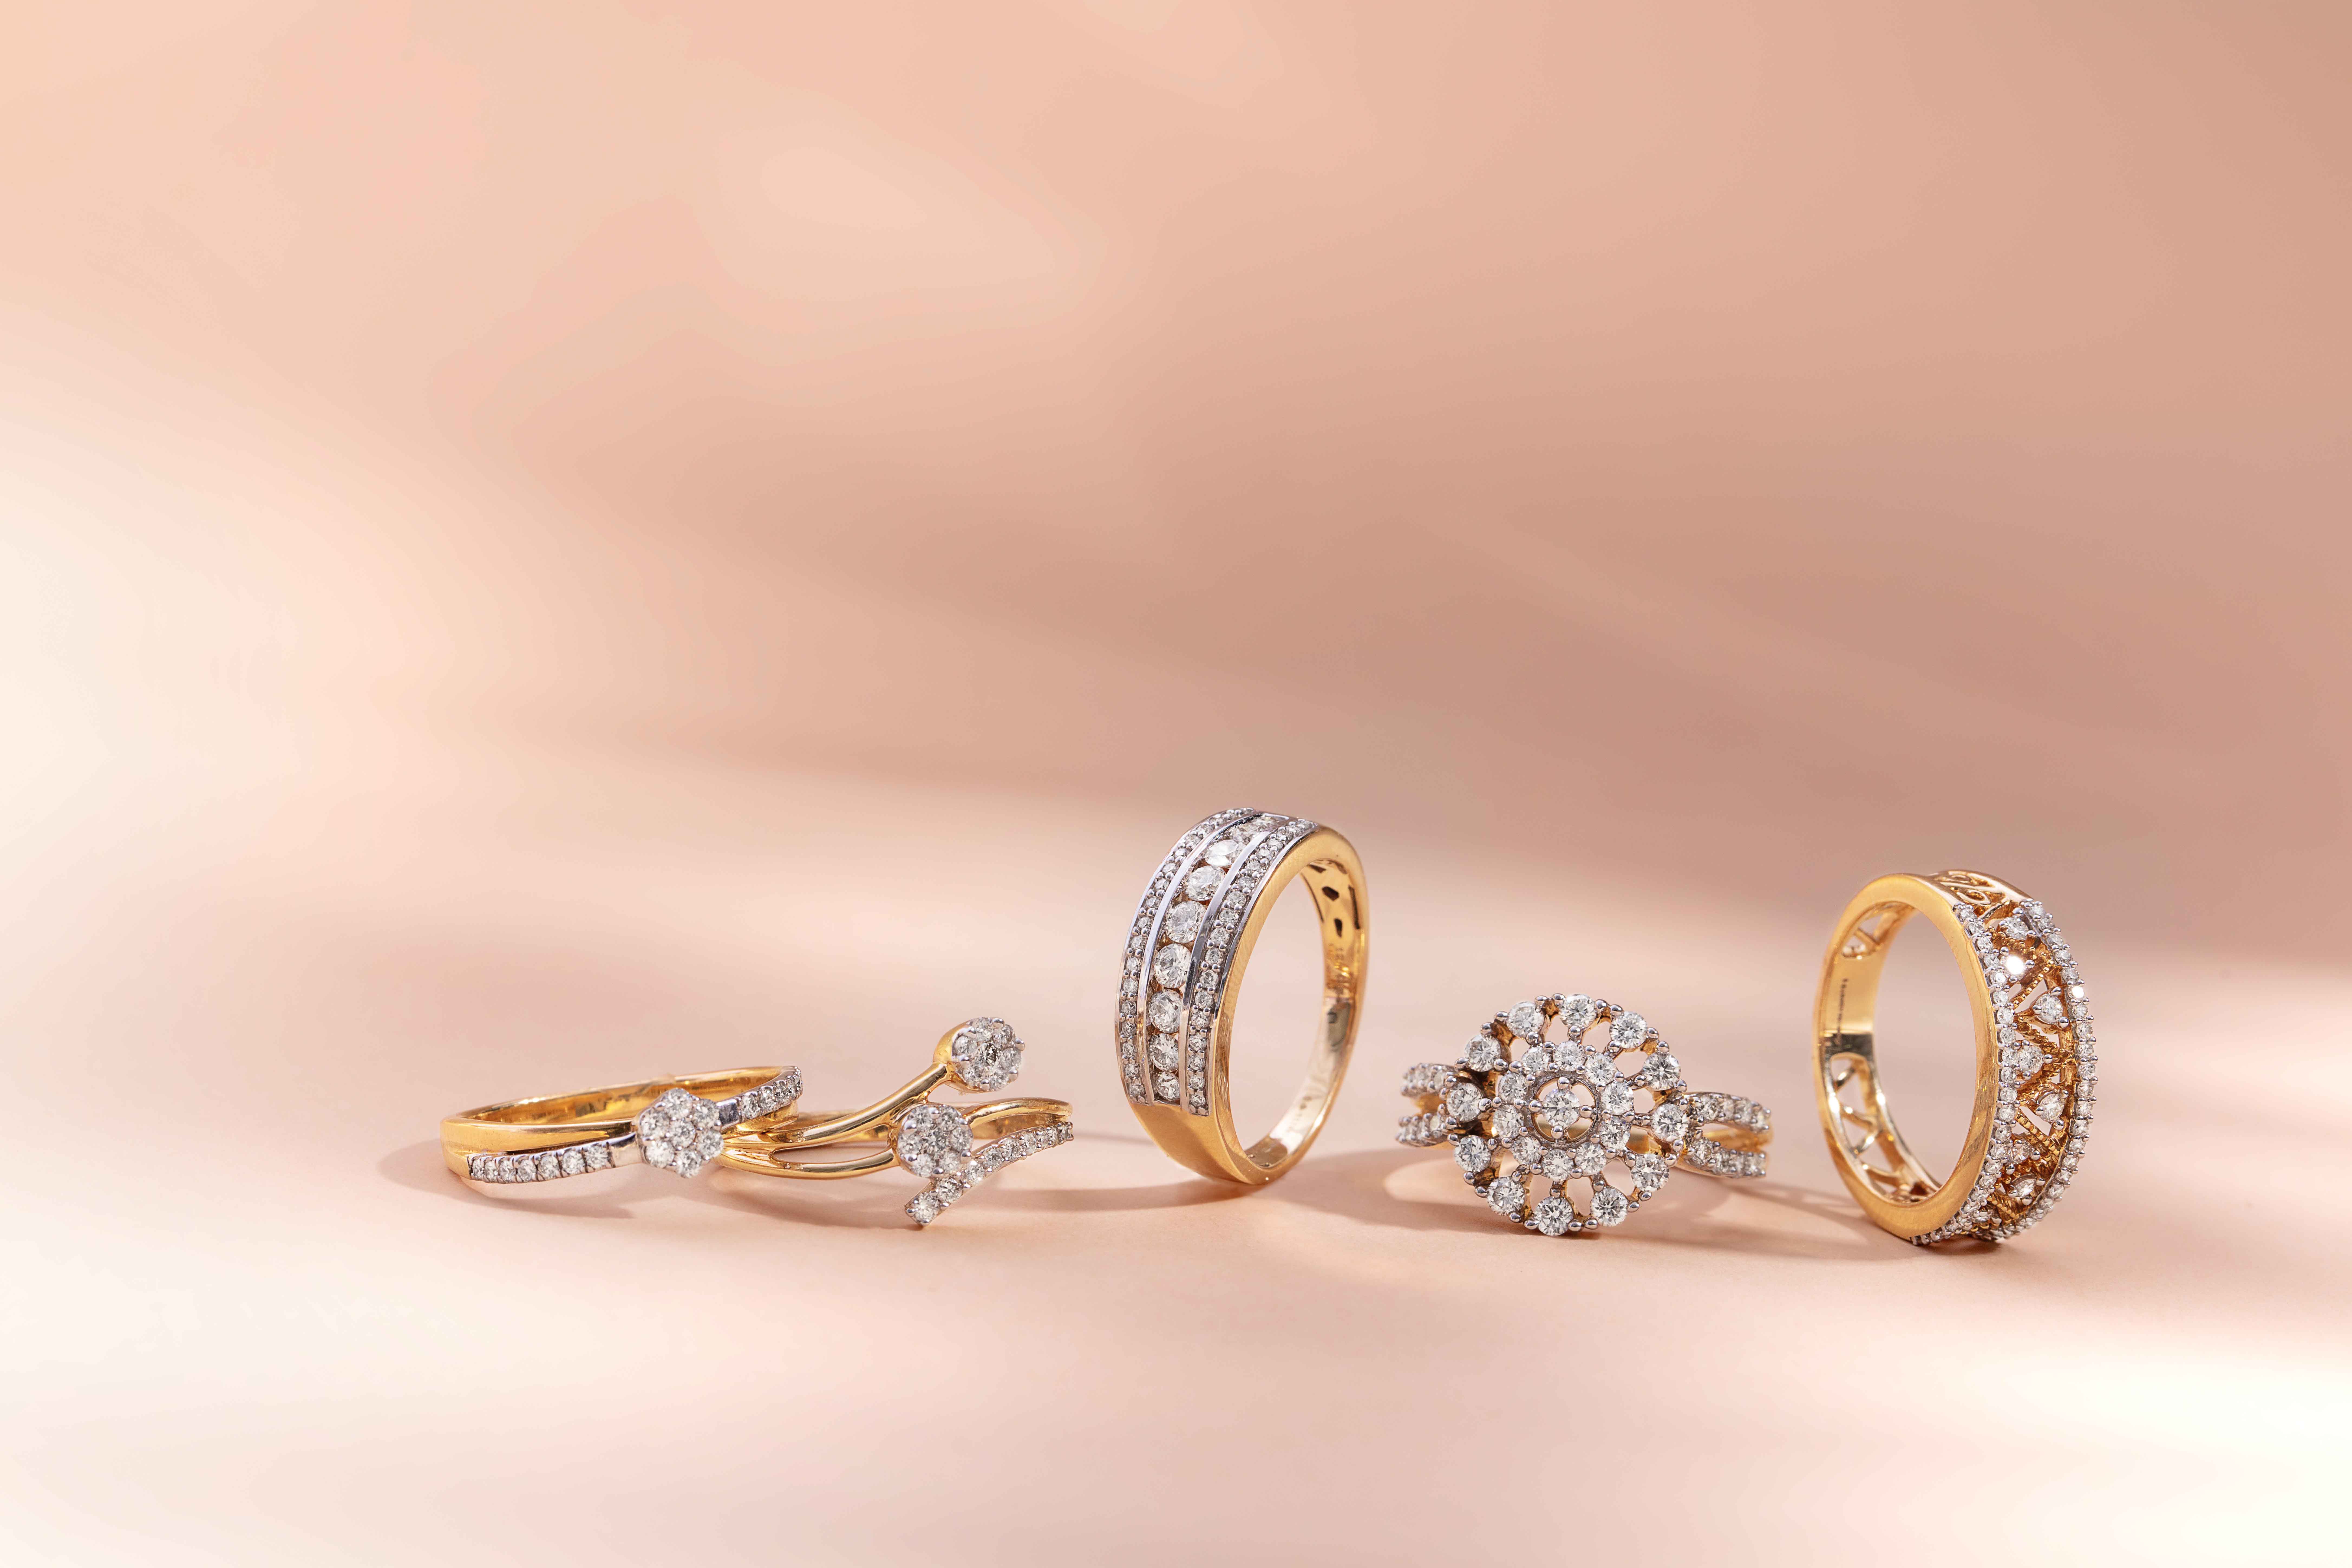 10-types-of-rings-everyone-should-know-about, by Ritvi Jewels